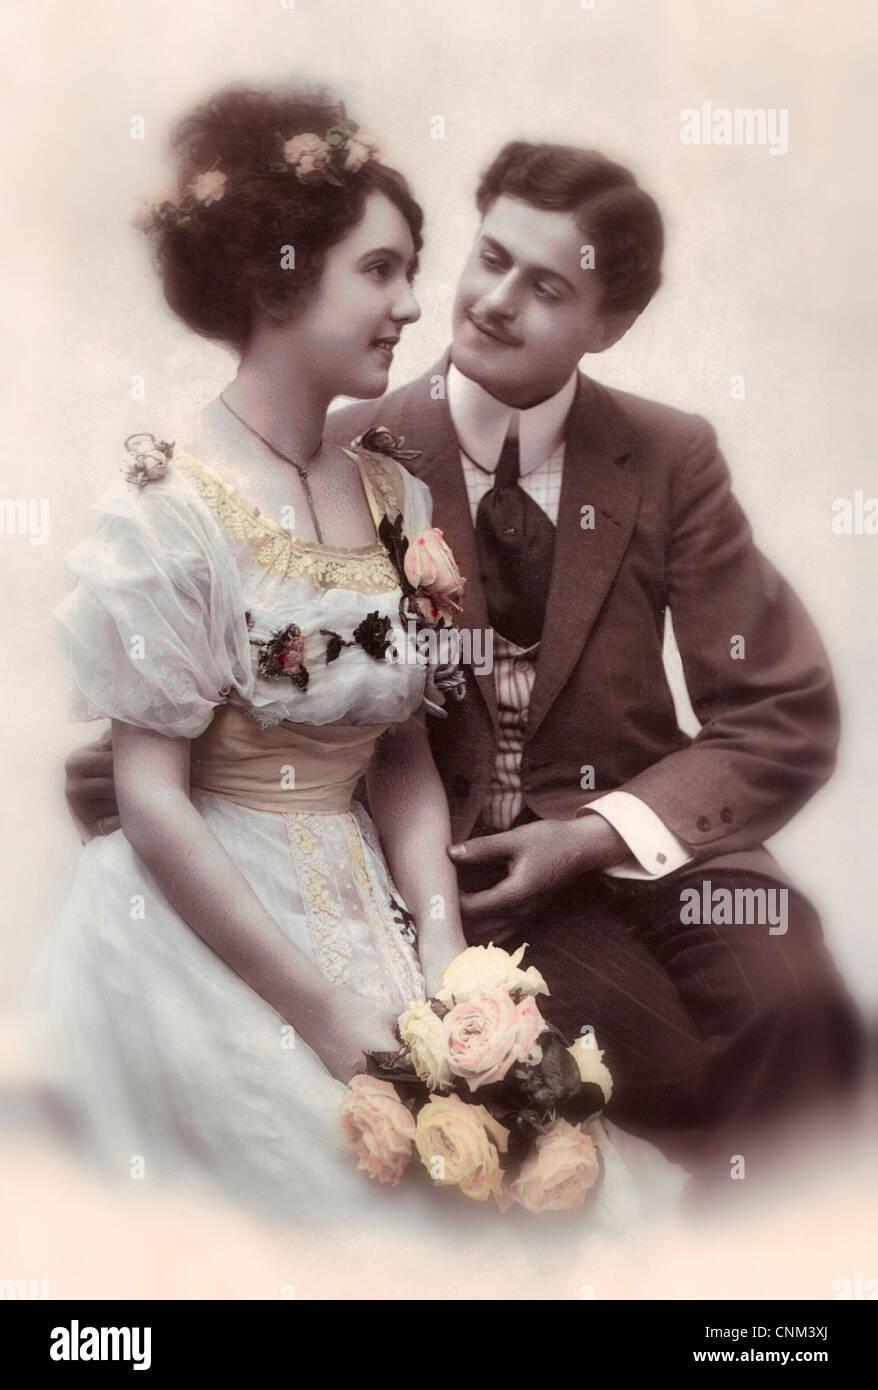 Vintage photo of bride and groom with vignetting Stock Photo